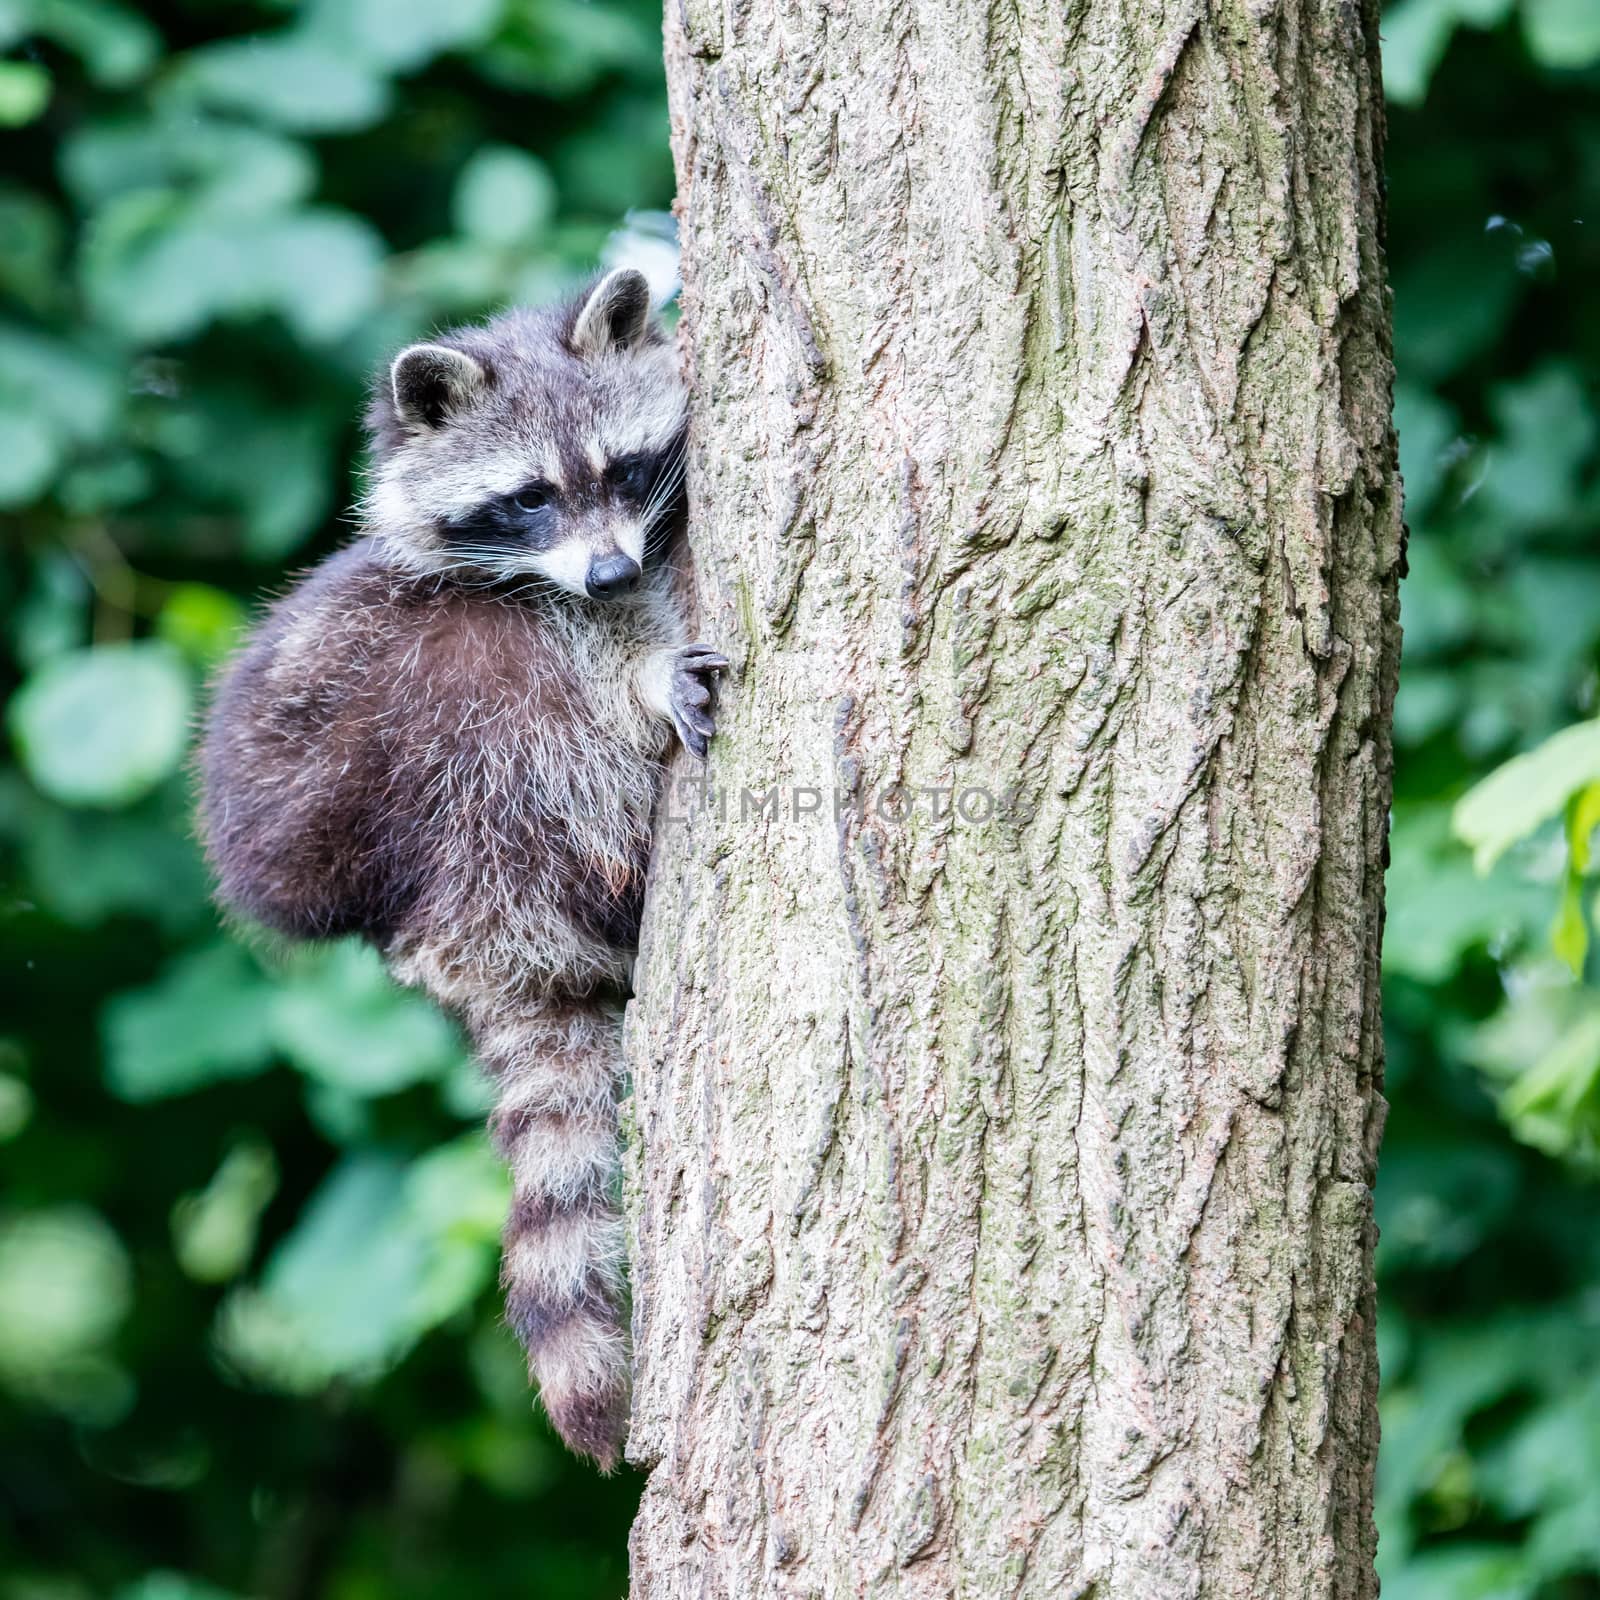 Racoon climbing a tree by michaklootwijk